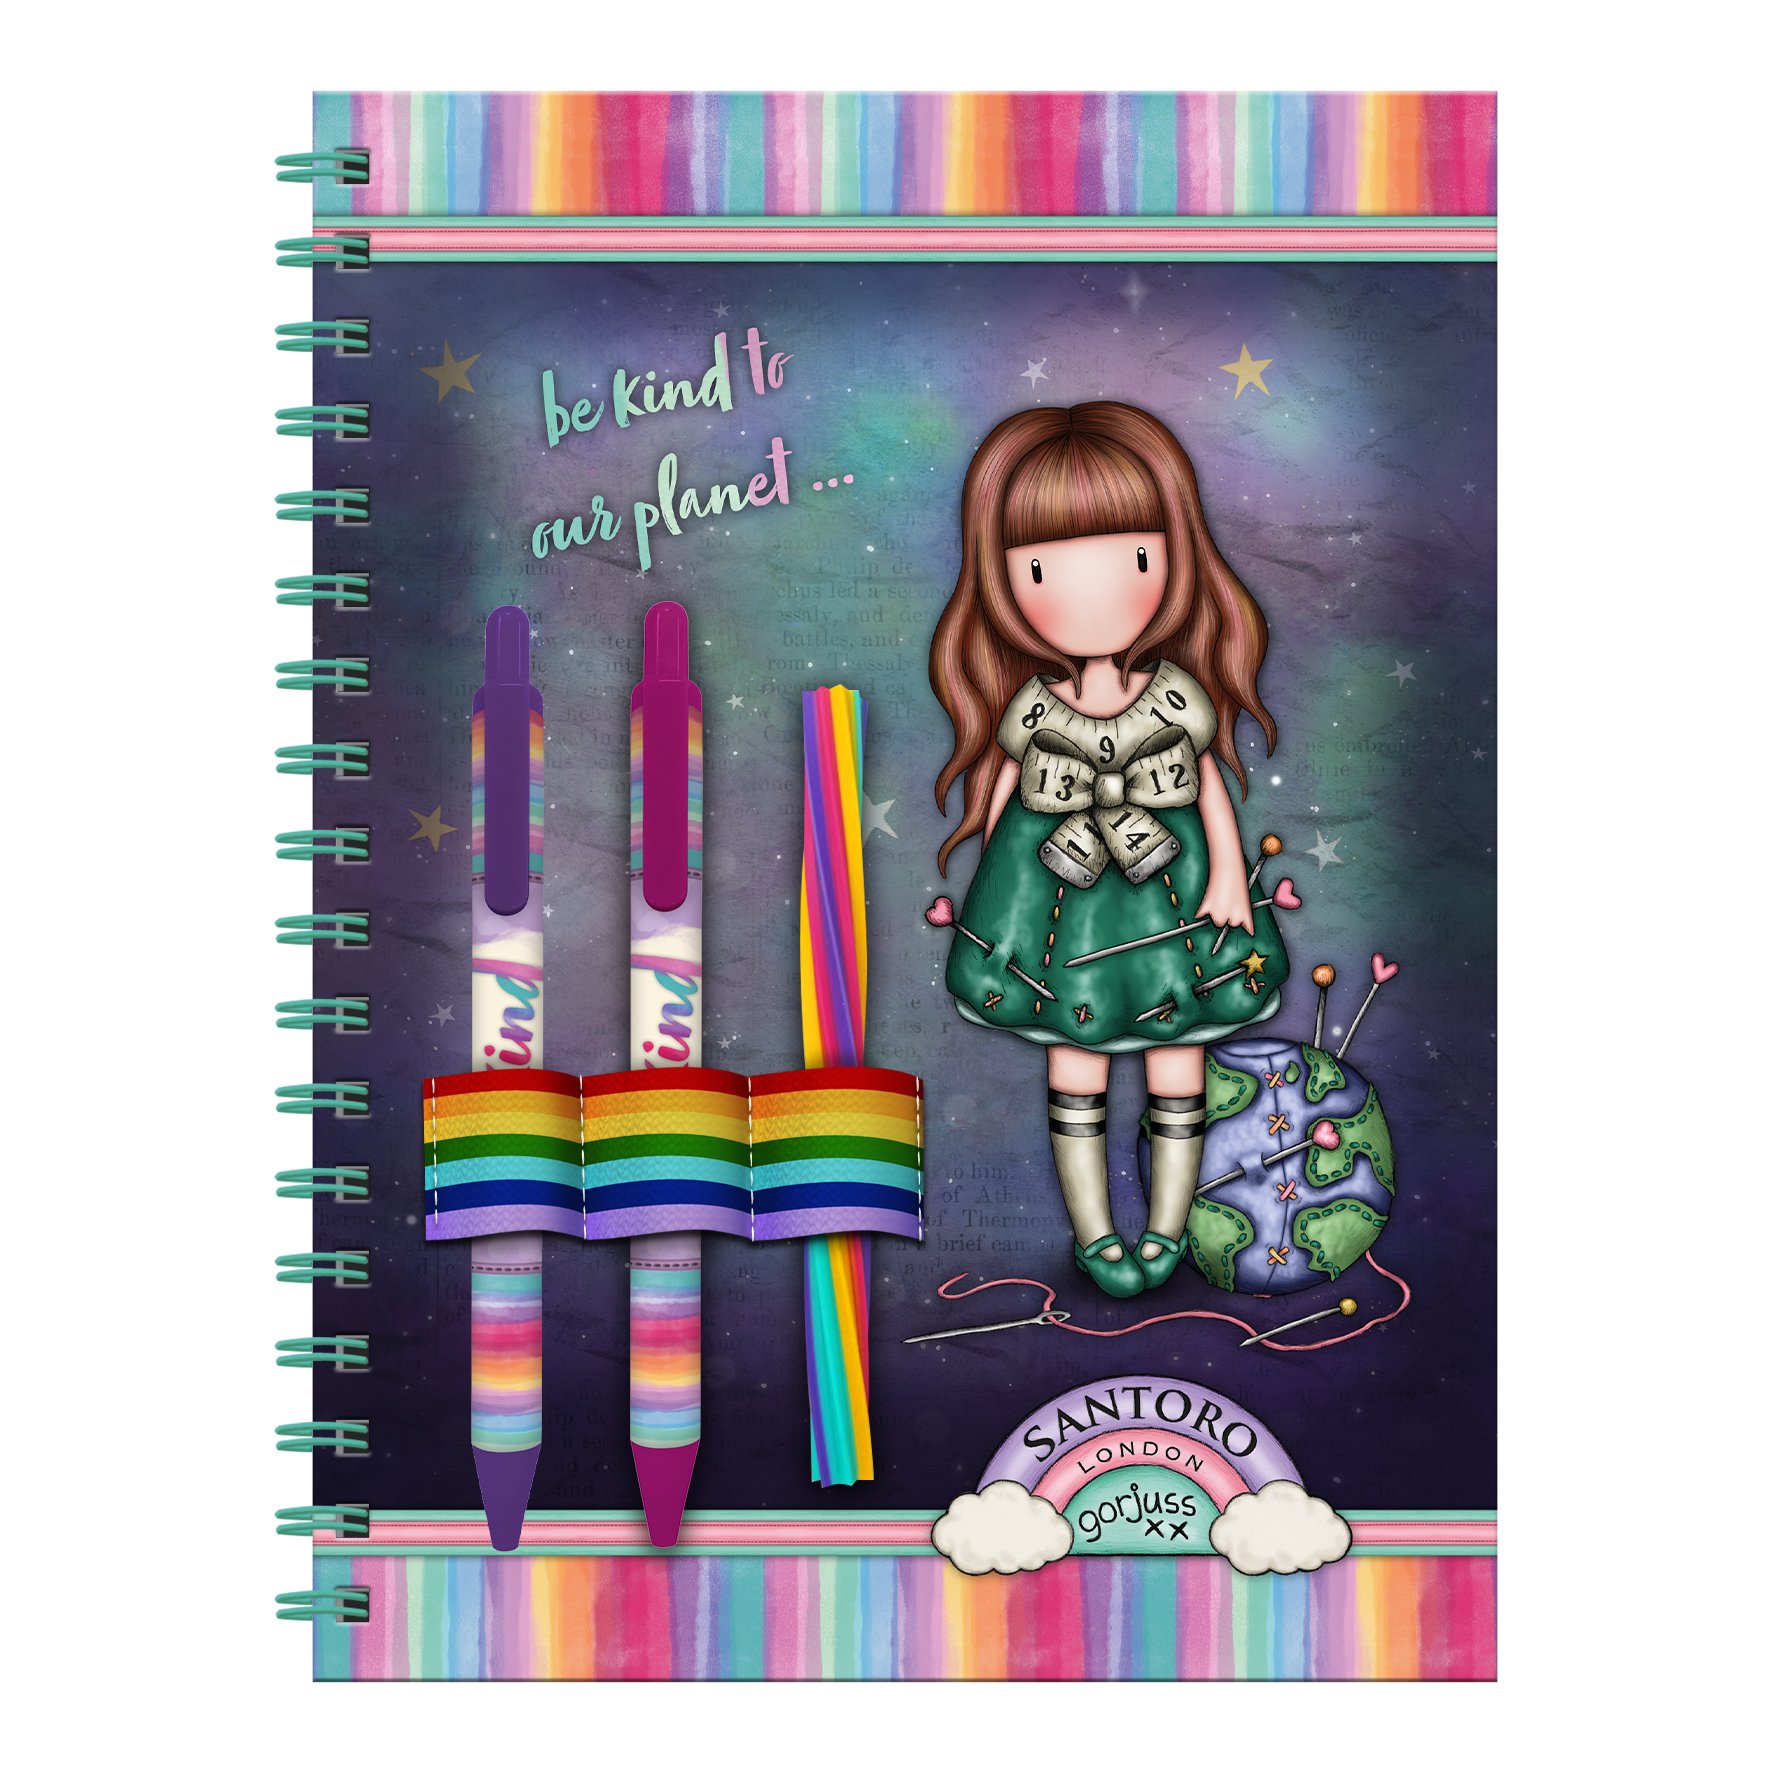 Santoro London Gorjuss Be Kind To Each Other Notebook with Staionery